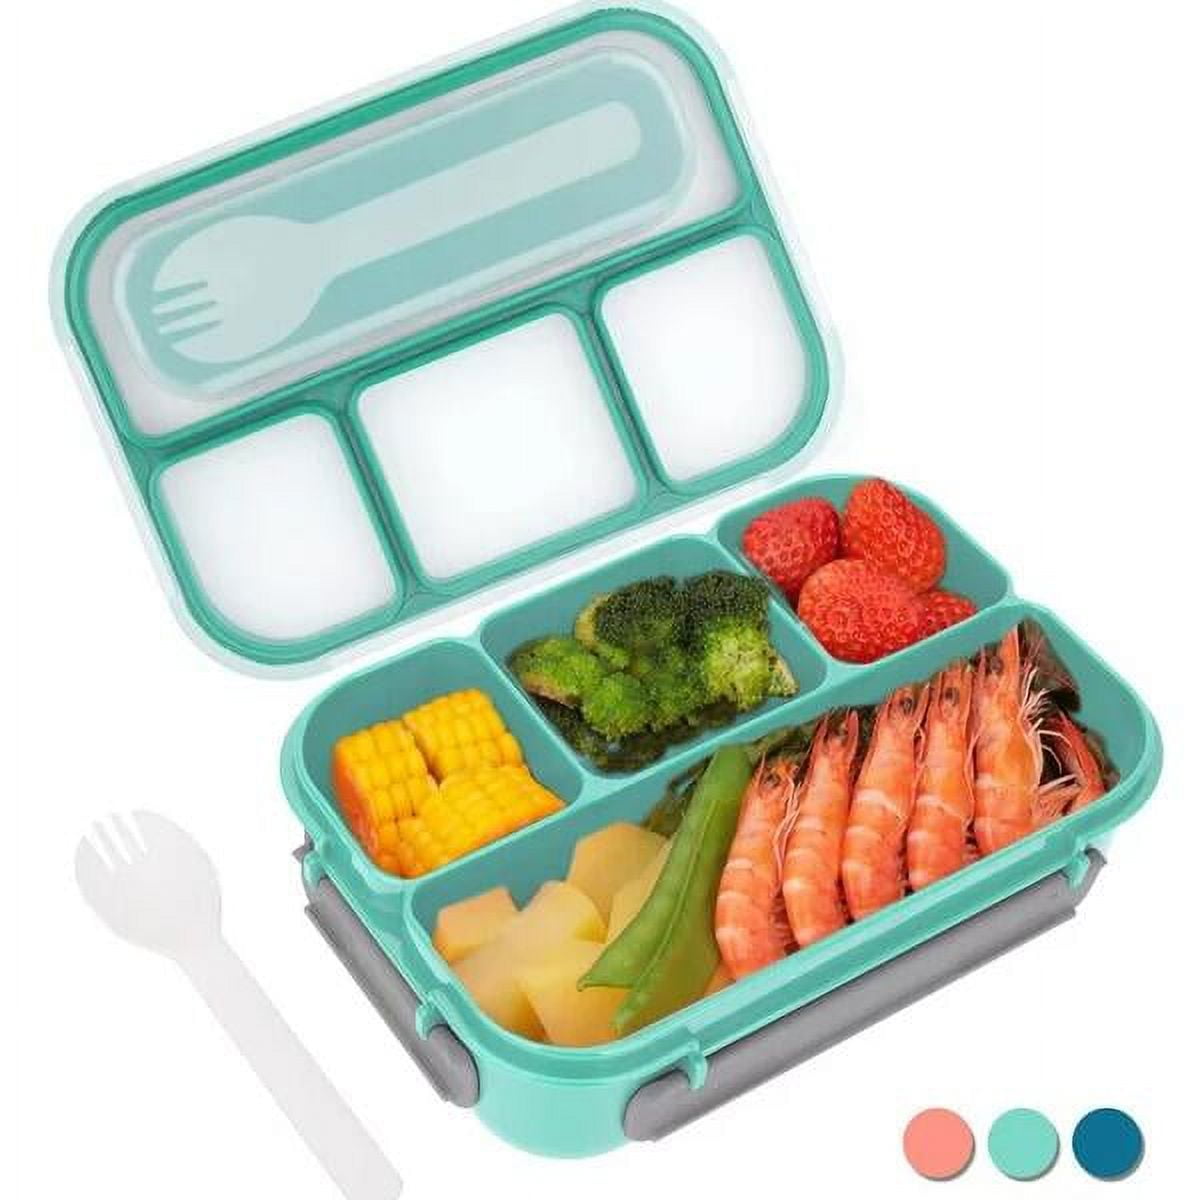 Goodwill Bento Box Lunch Box Kids, Bento Box Adult Lunch Box, Lunch  Containers for Adults/Kids/Toddler, 5 Cup Bento Boxes with 4  Compartments&Fork, Leak-Proof, Microwave/Dishwasher/Freezer Safe，Pink 